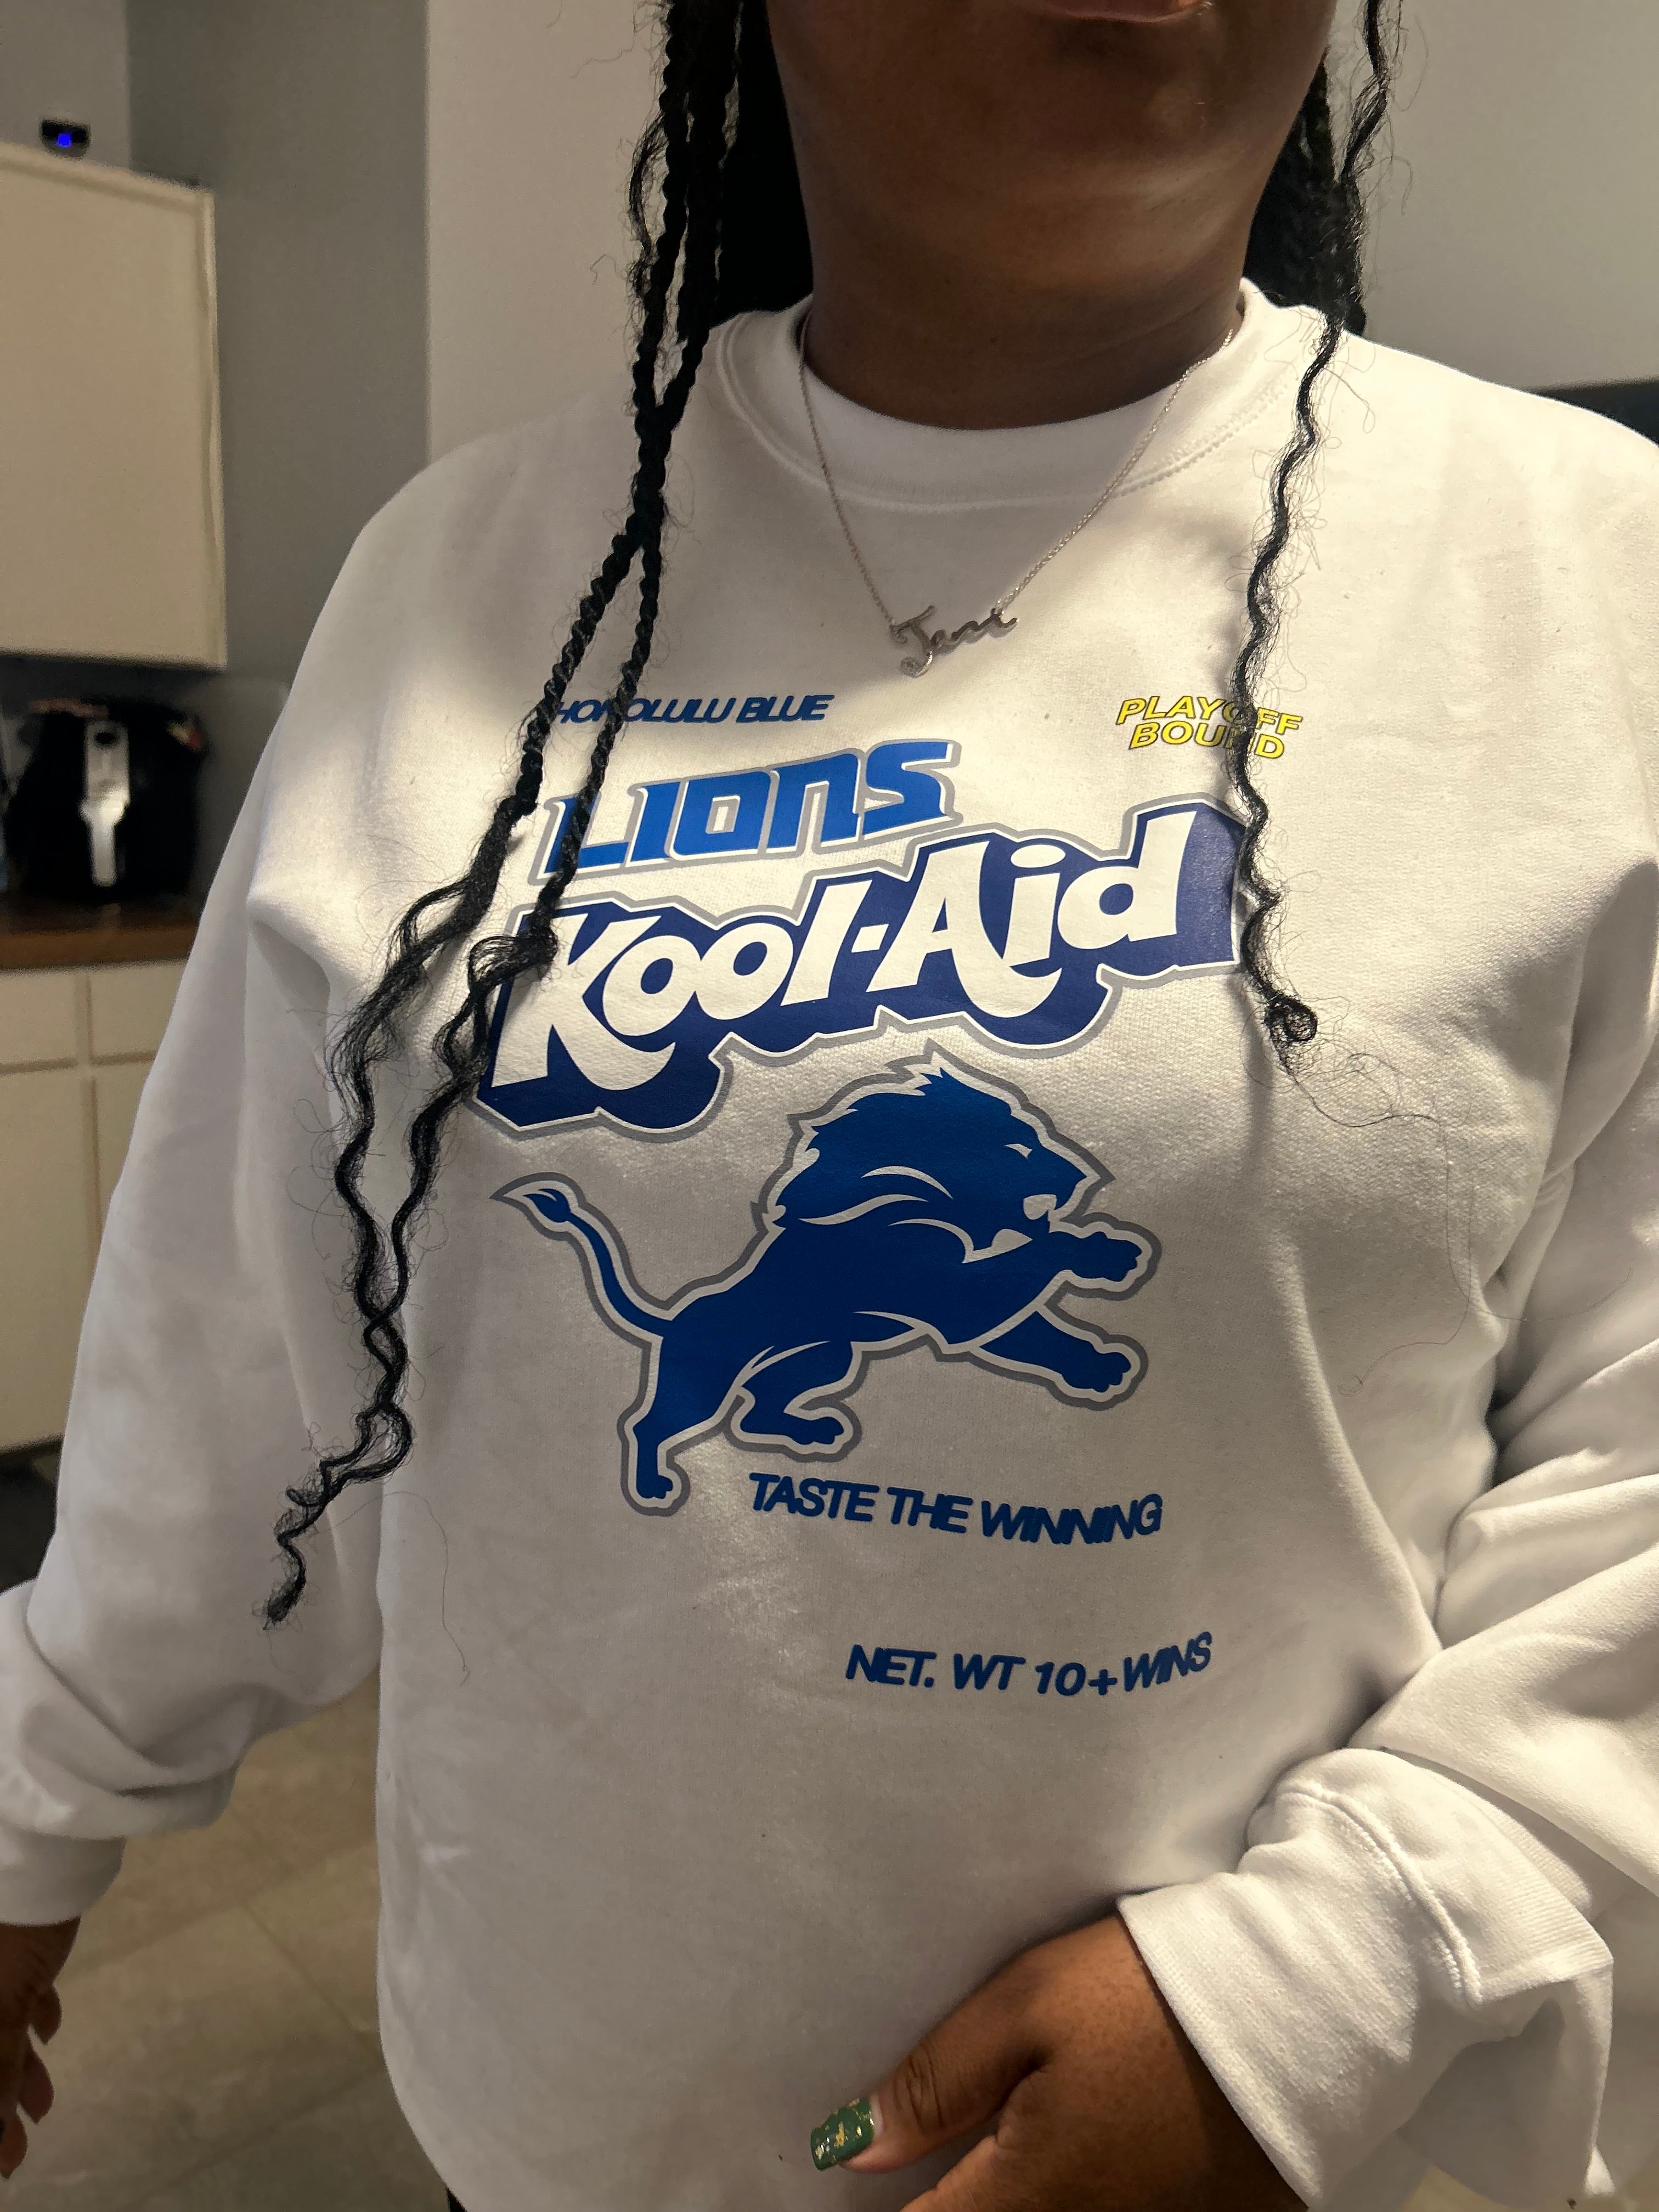 Yo my company manager sent me this today : r/detroitlions